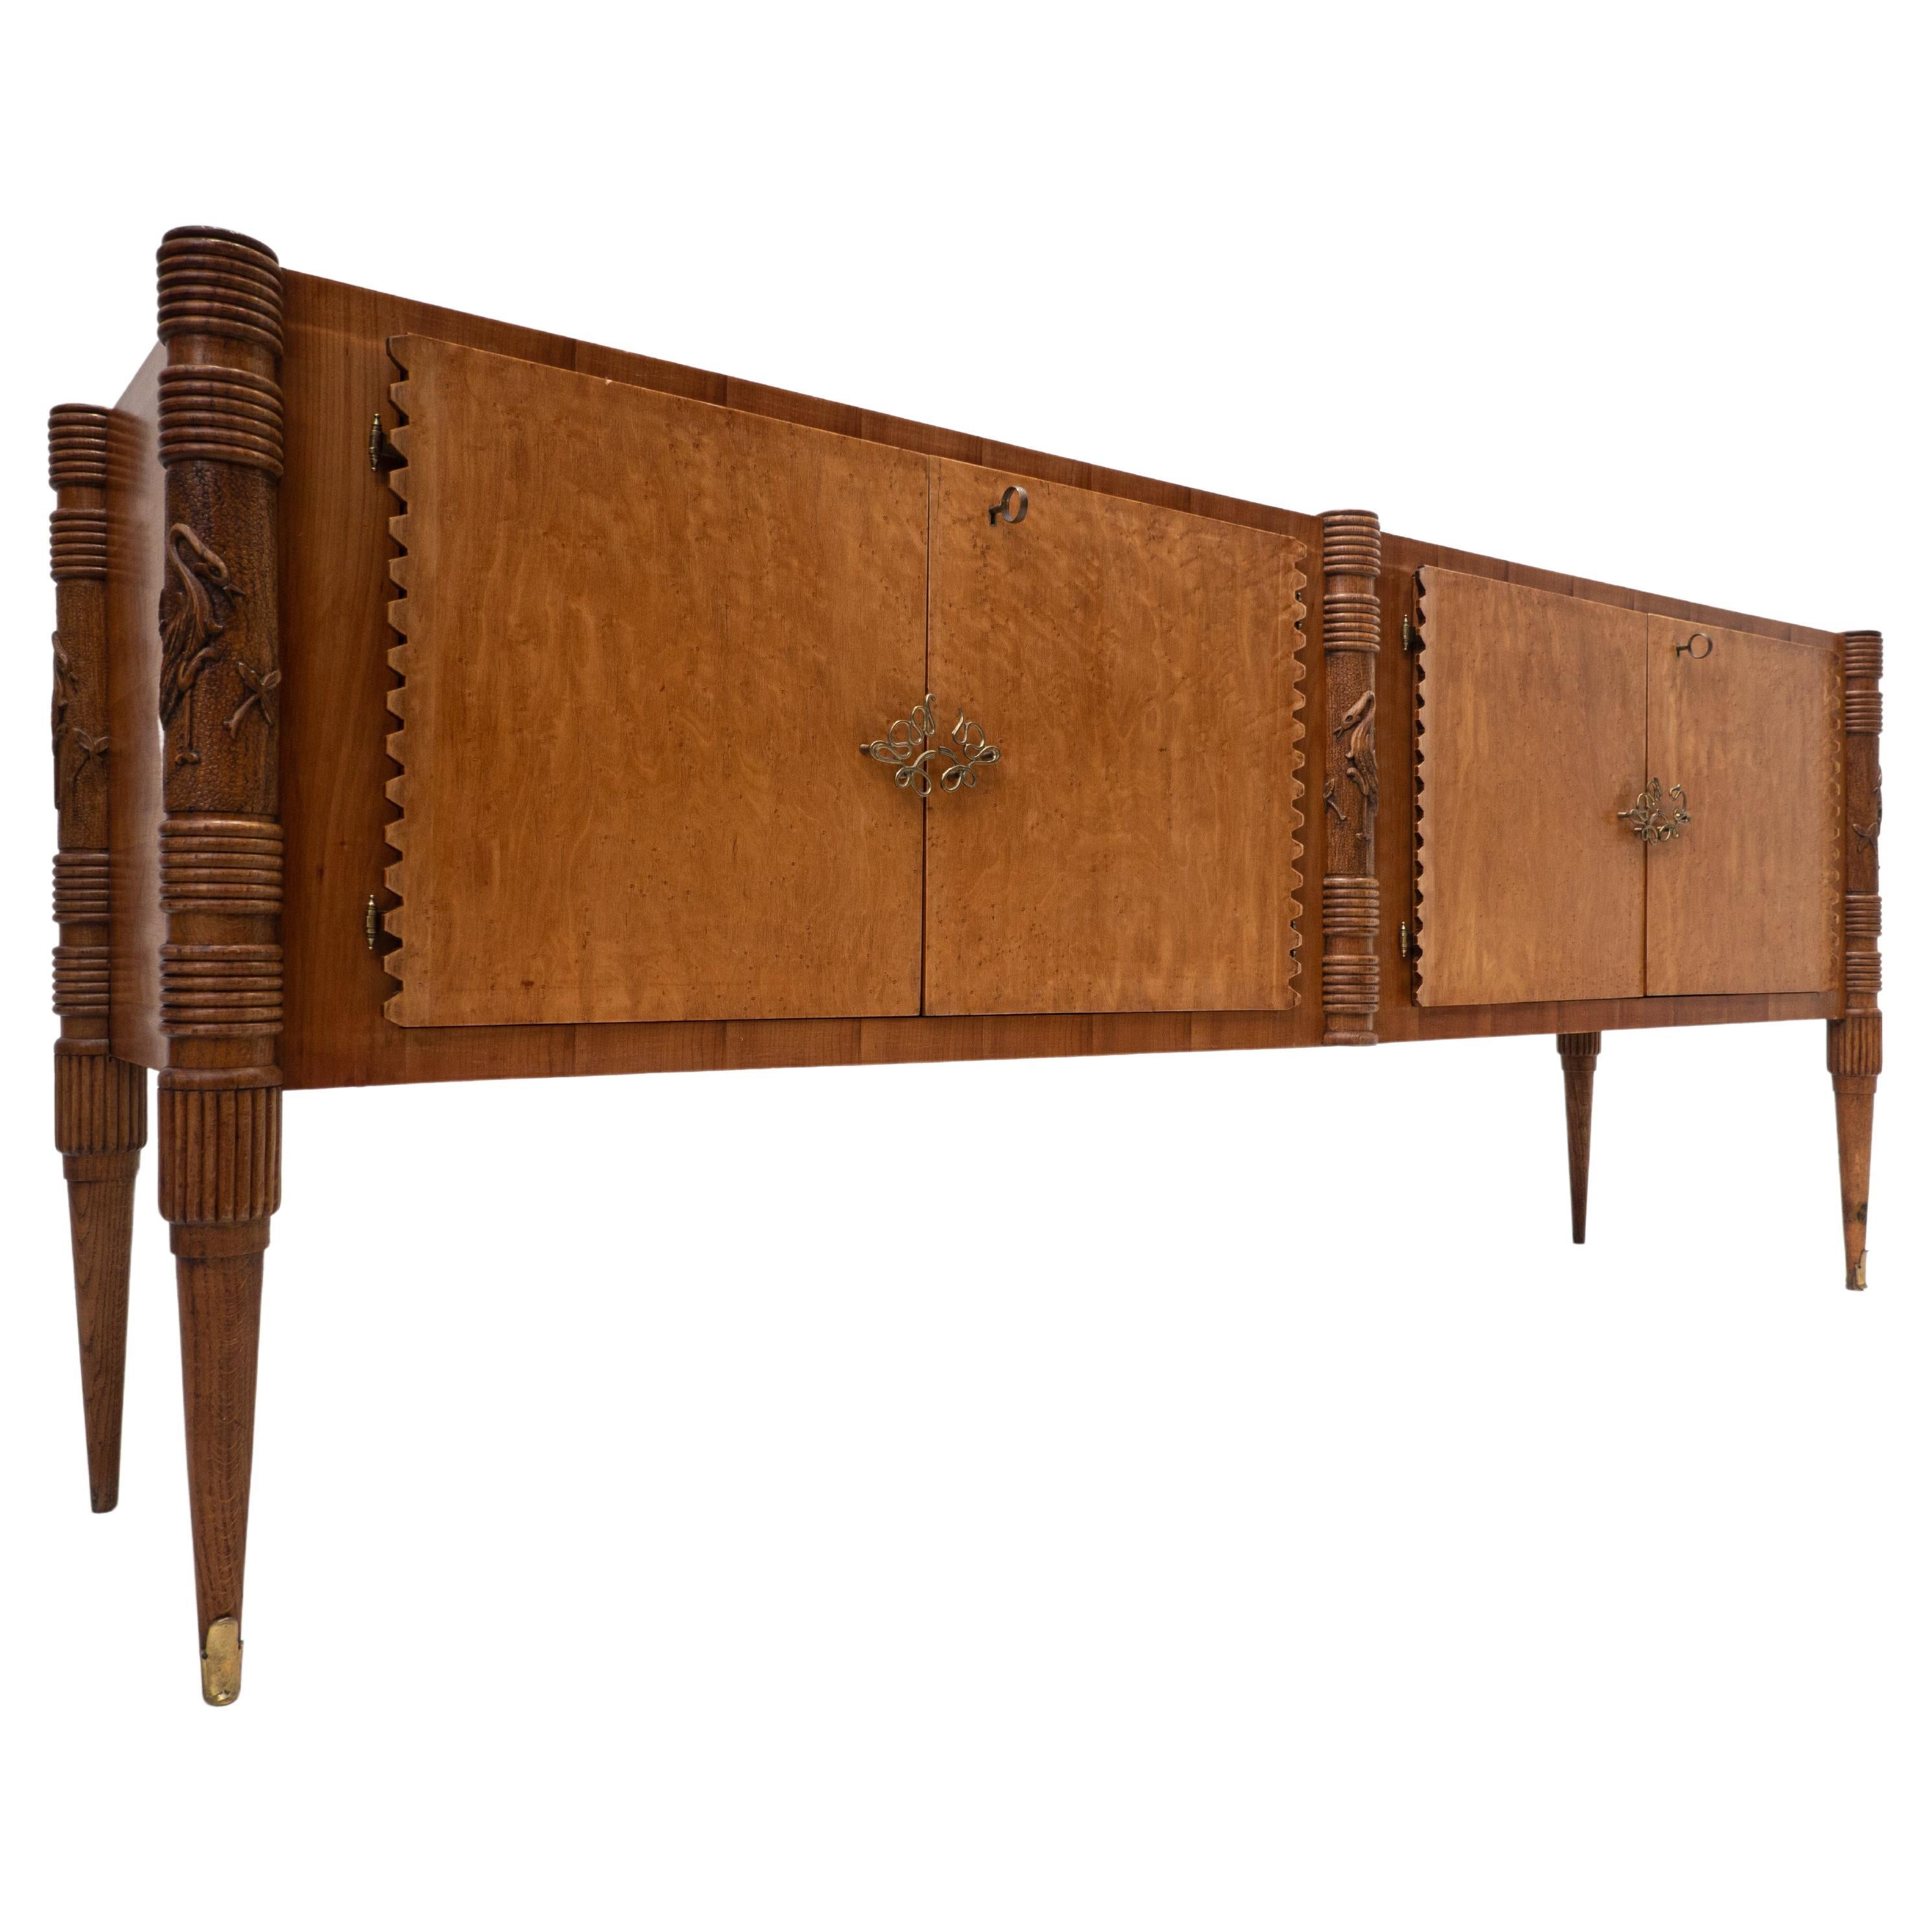 Large Italian Wooden Sideboard by Pier Luigi Colli with Four Doors, 1940s For Sale